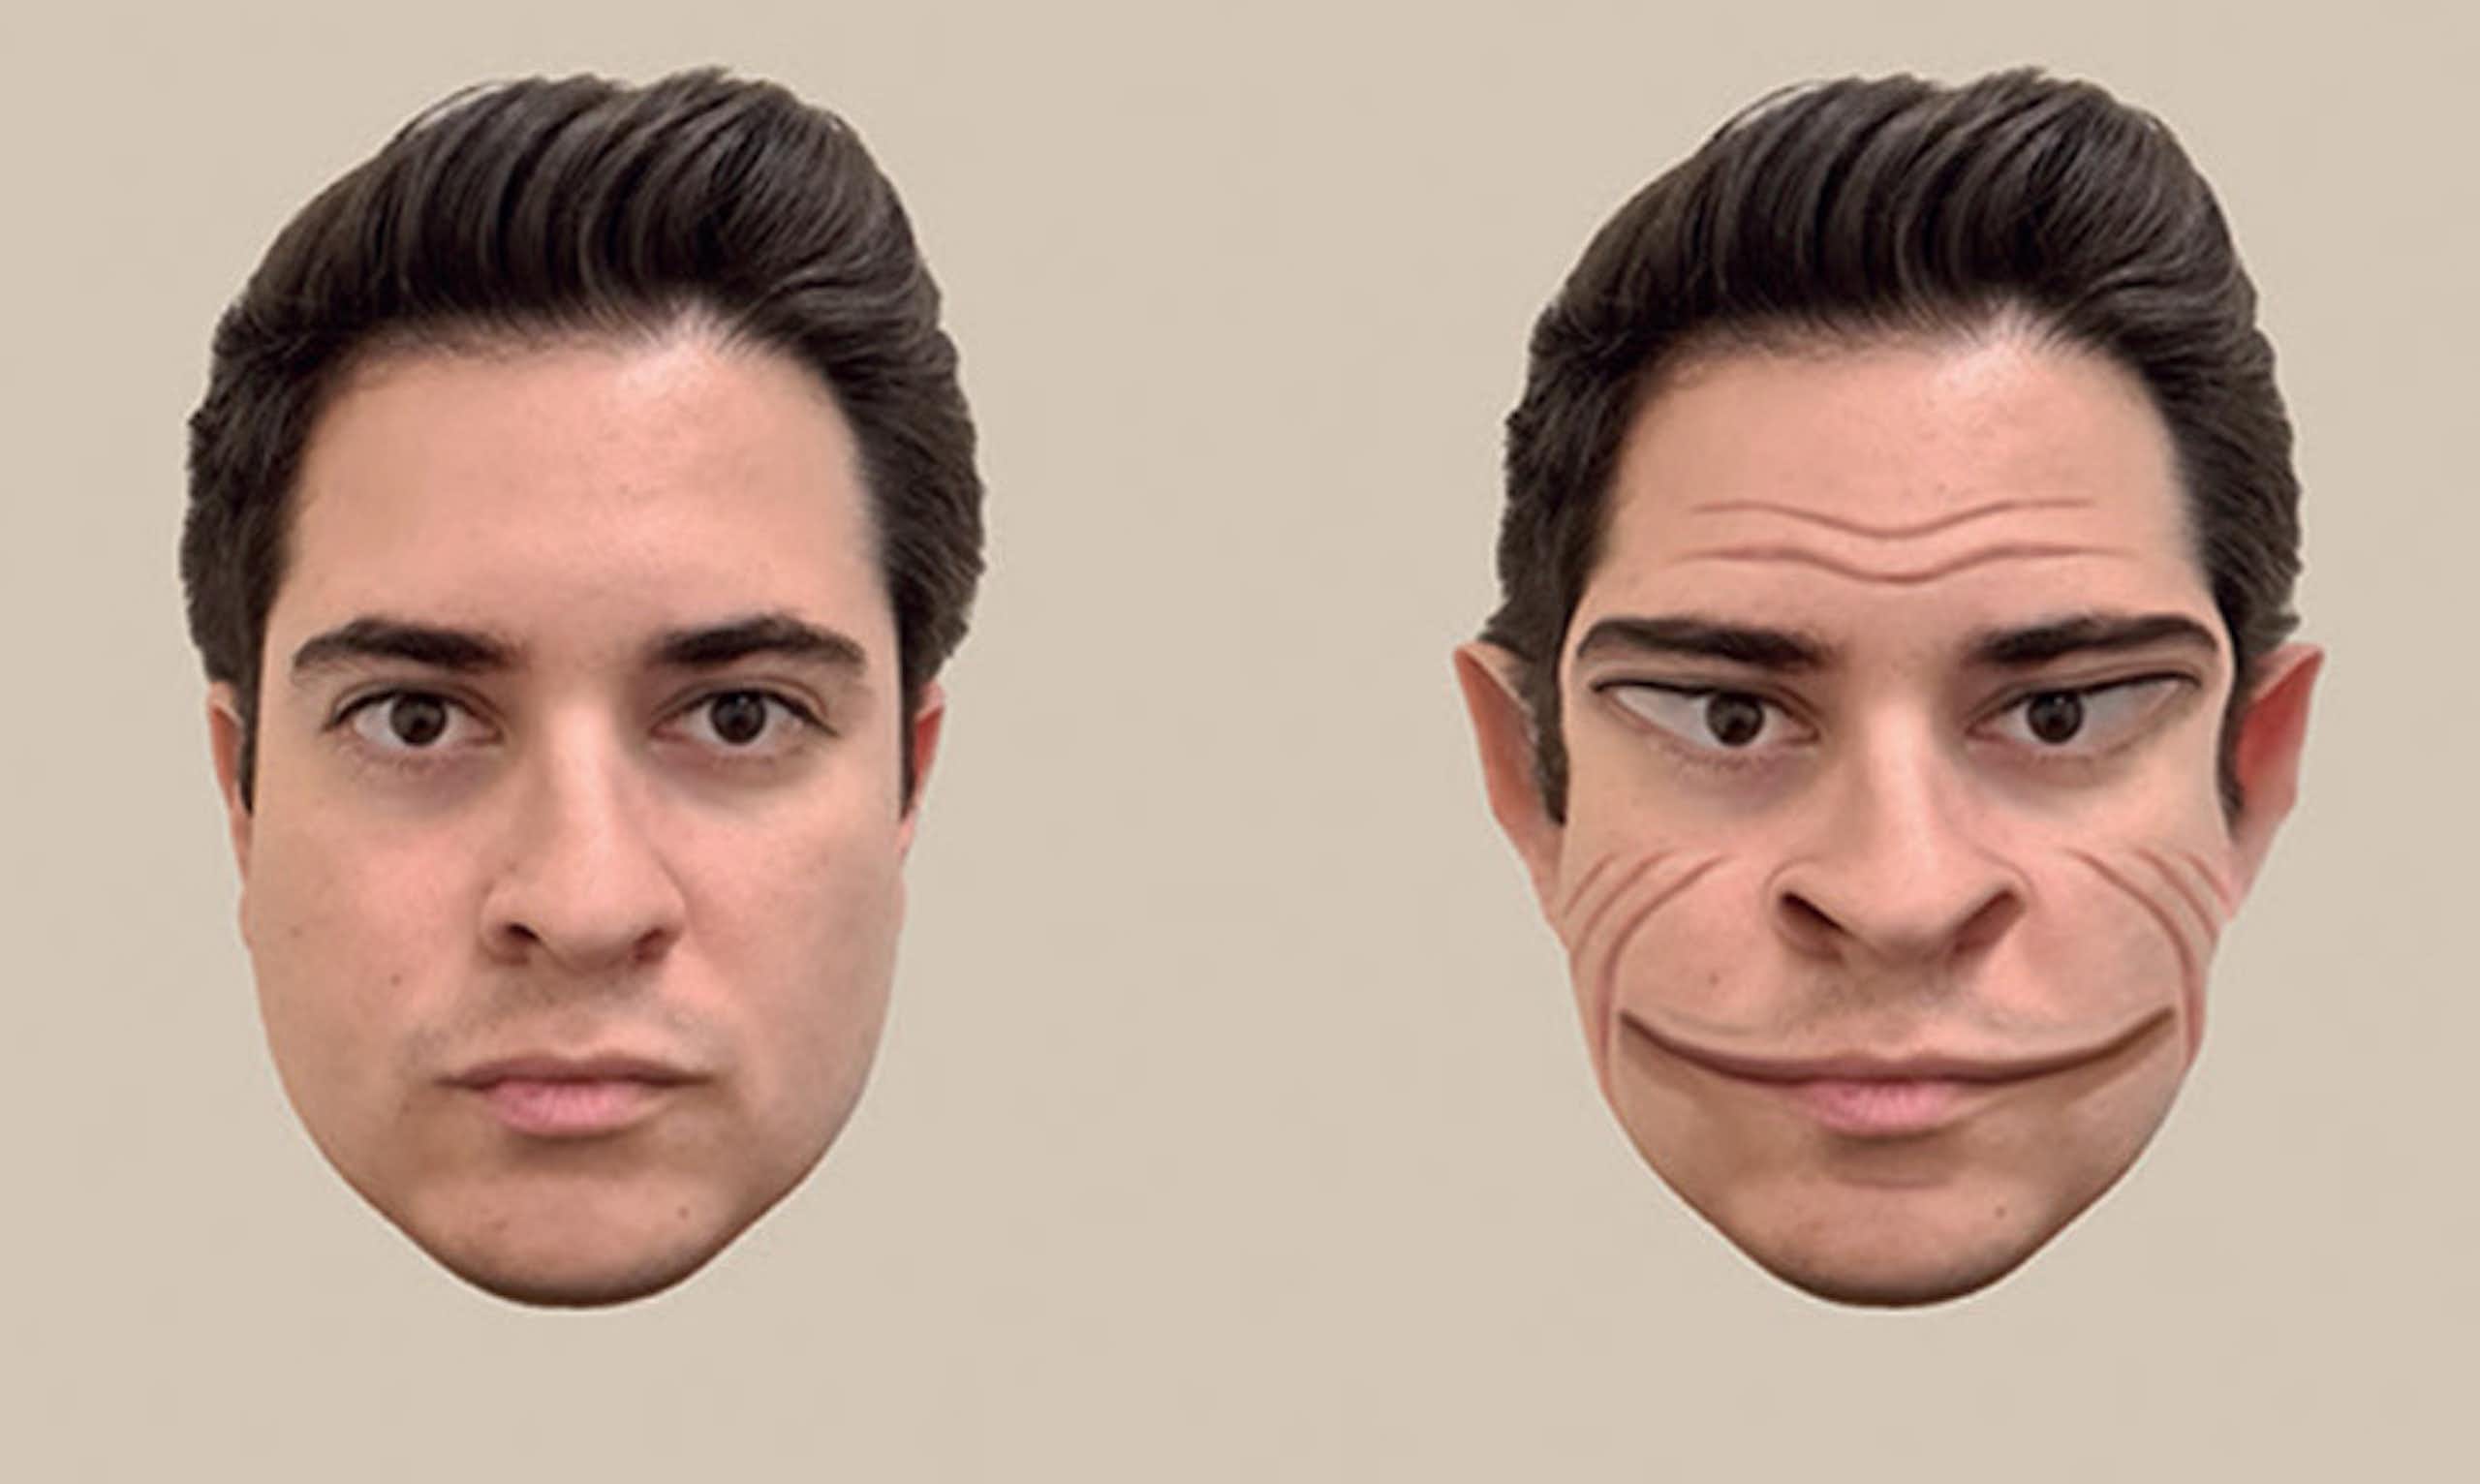 Side by side comparison of the same face, the one on the right hand side is distorted